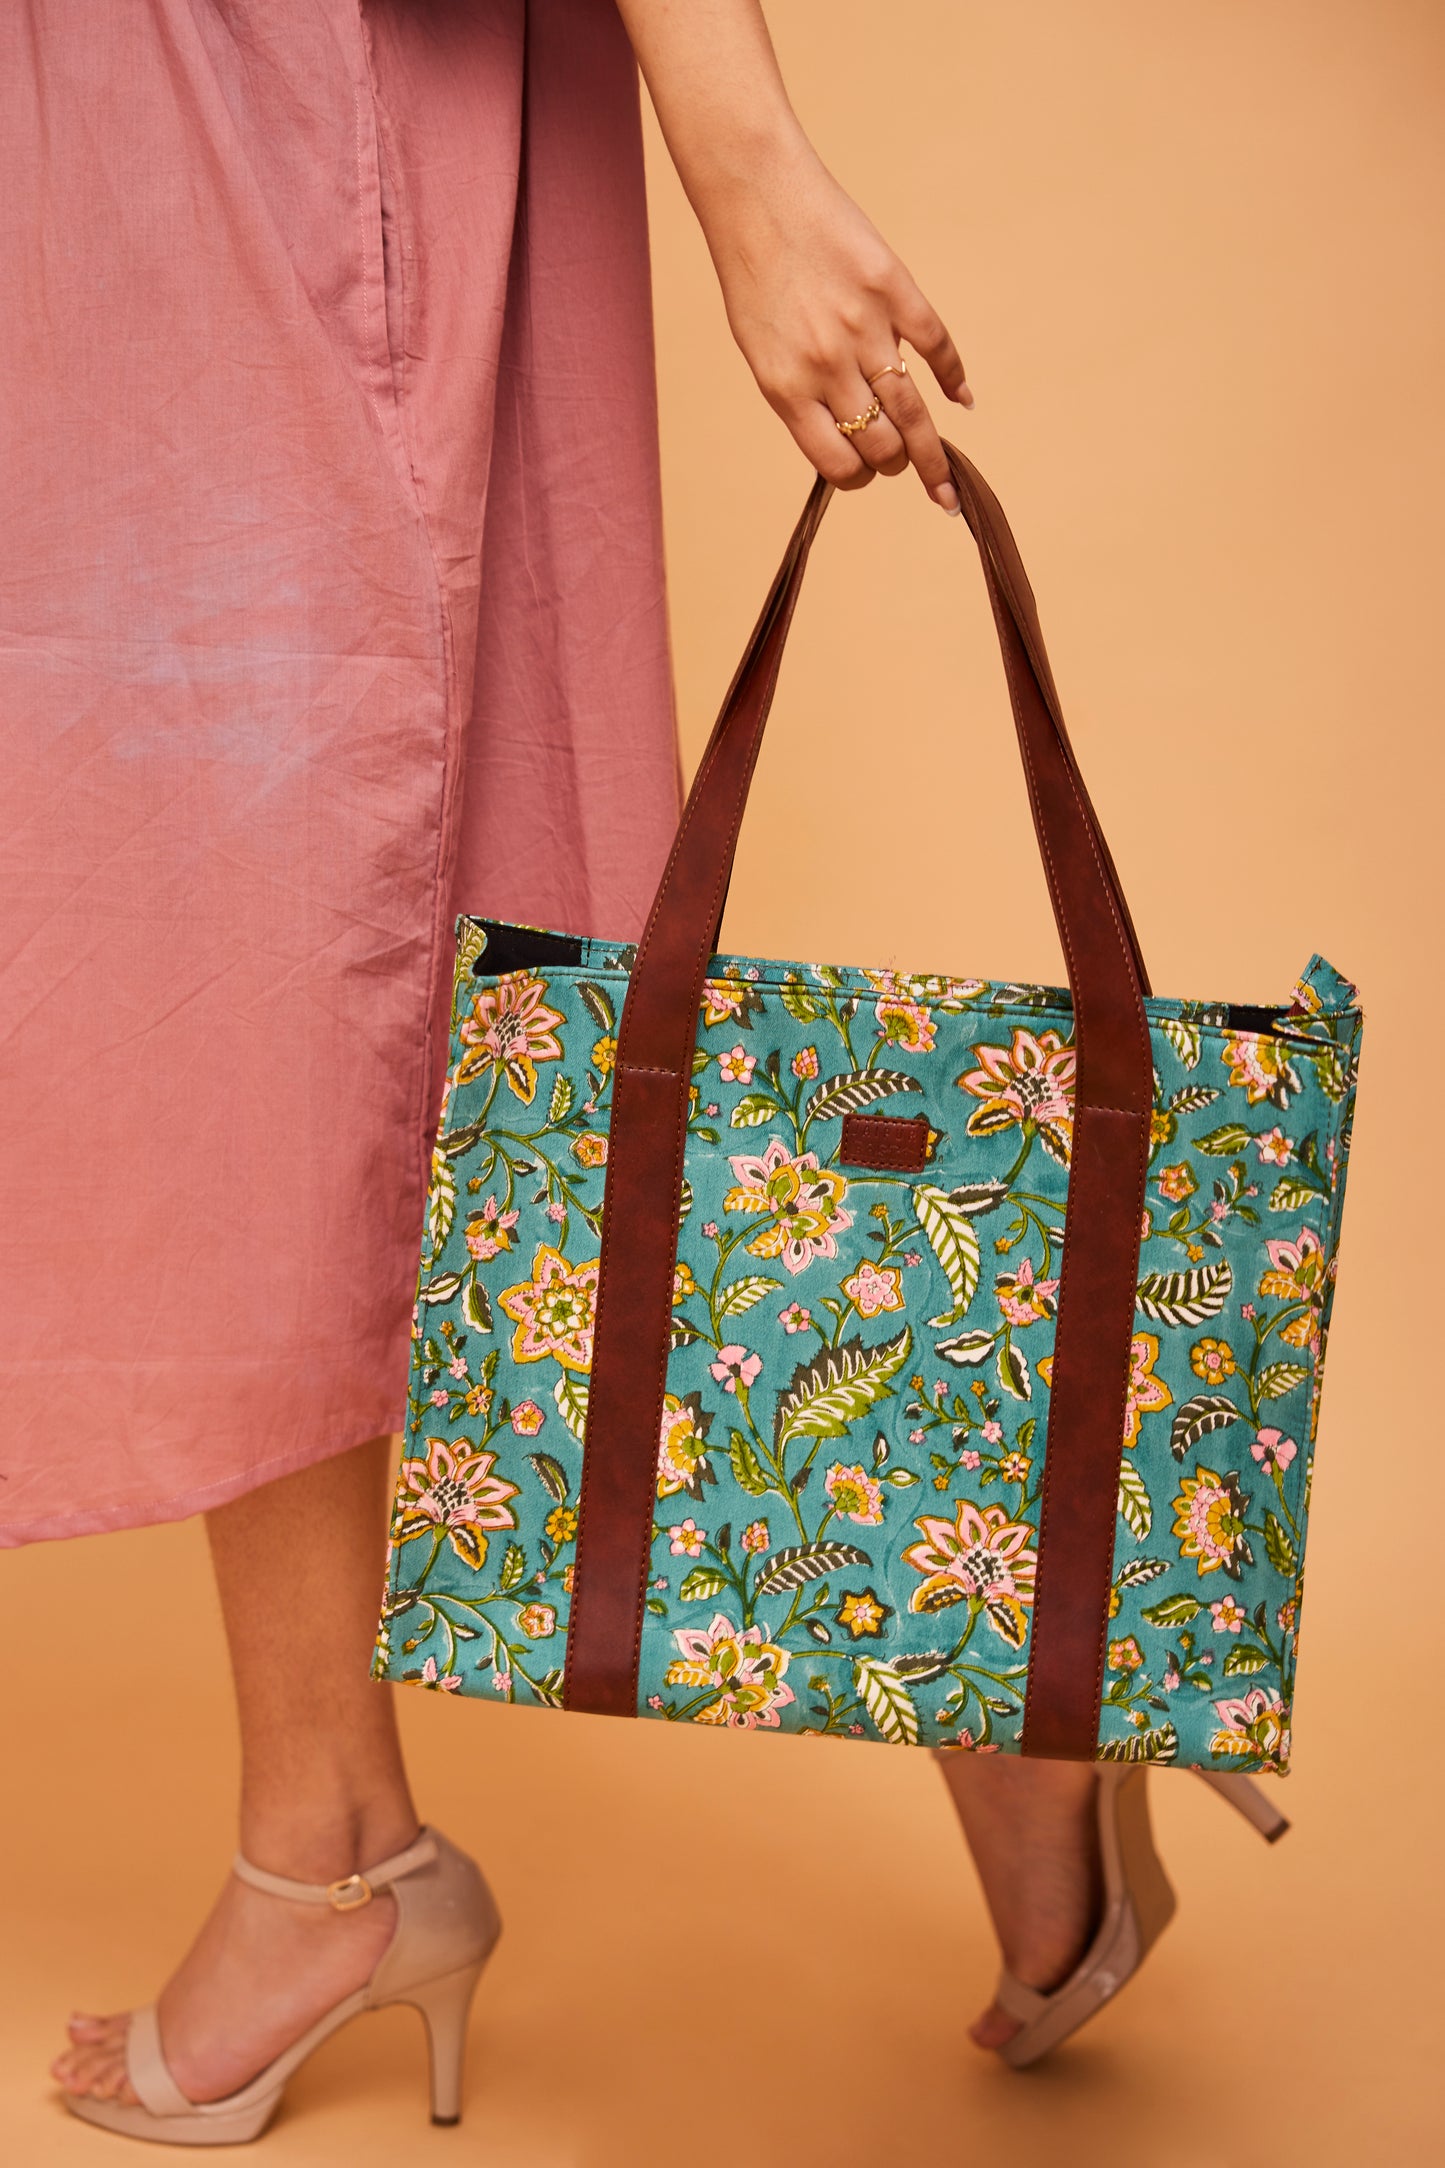 Tiffany Blue Structured Tote Bag